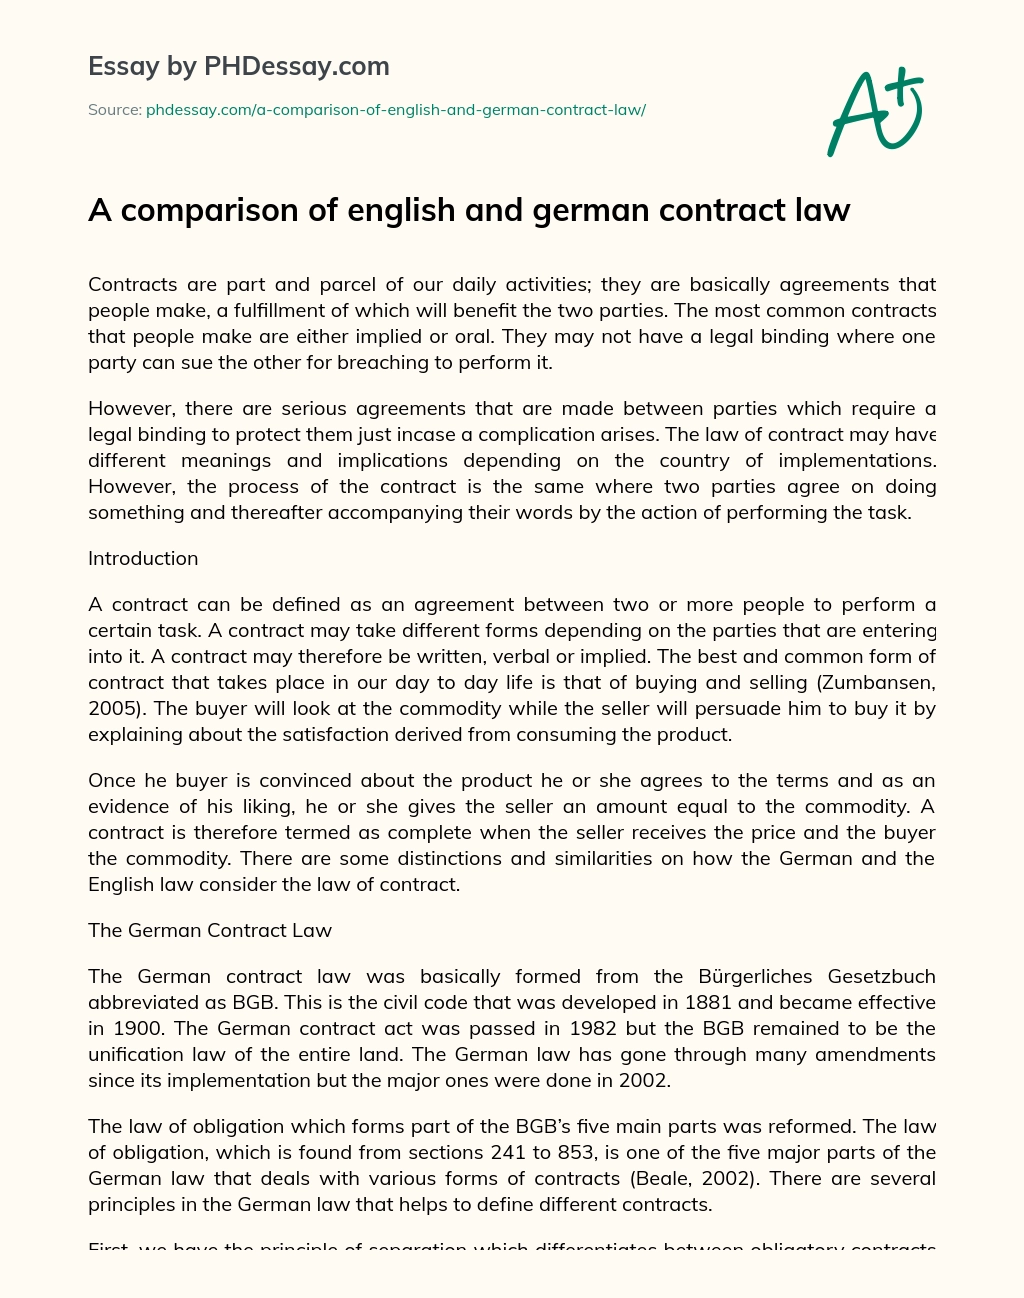 A comparison of english and german contract law essay